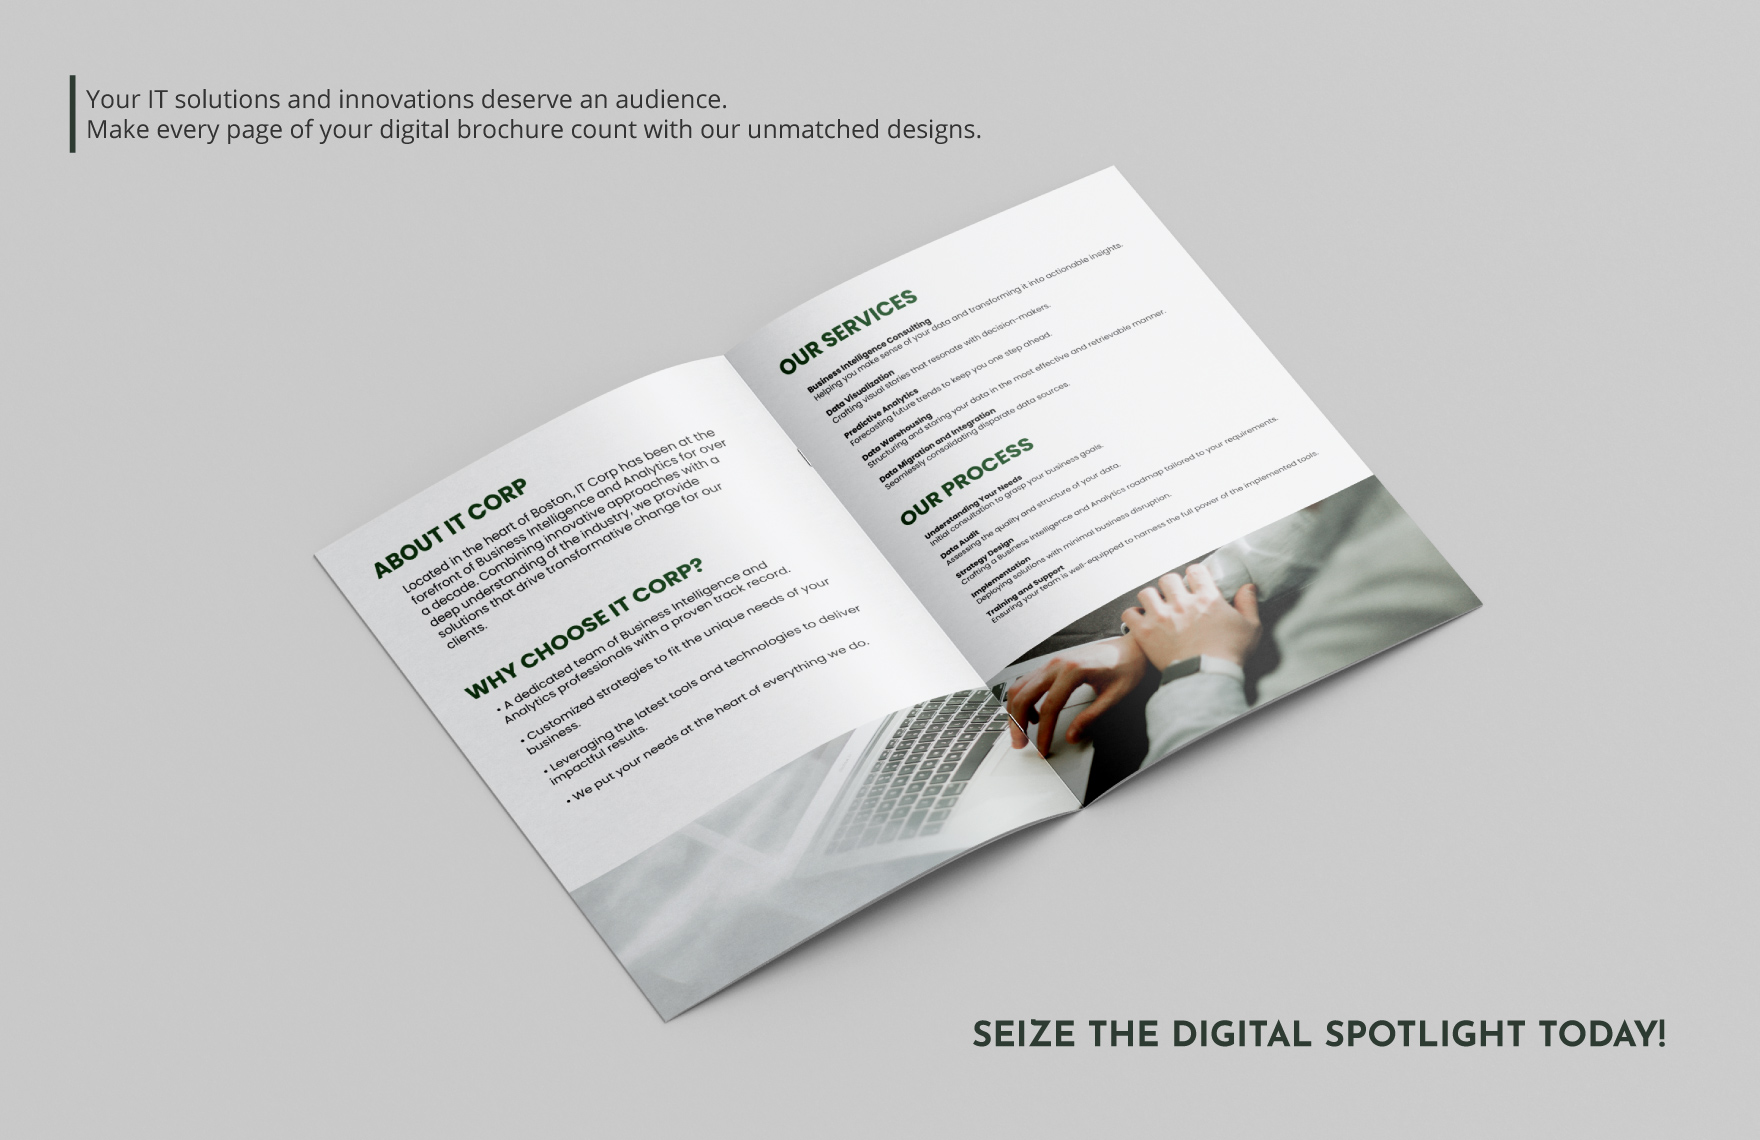 IT Business Intelligence & Analytics Consulting Company Profile Digital Brochure Template